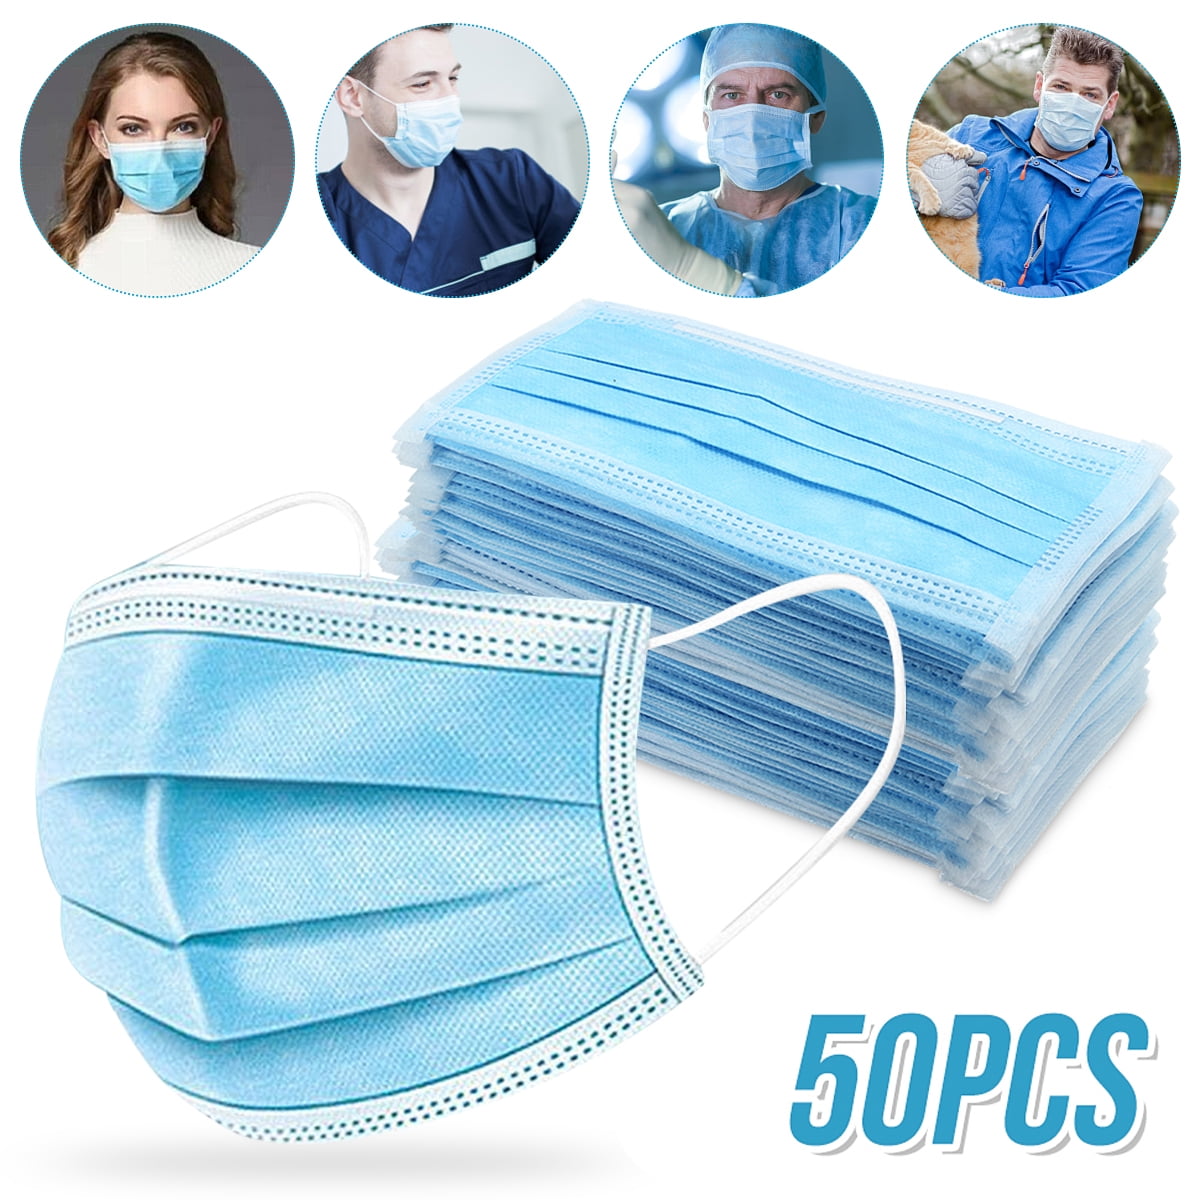 50/100Pcs Disposable Medical Surgical Mask 3 Layers Filtration ...